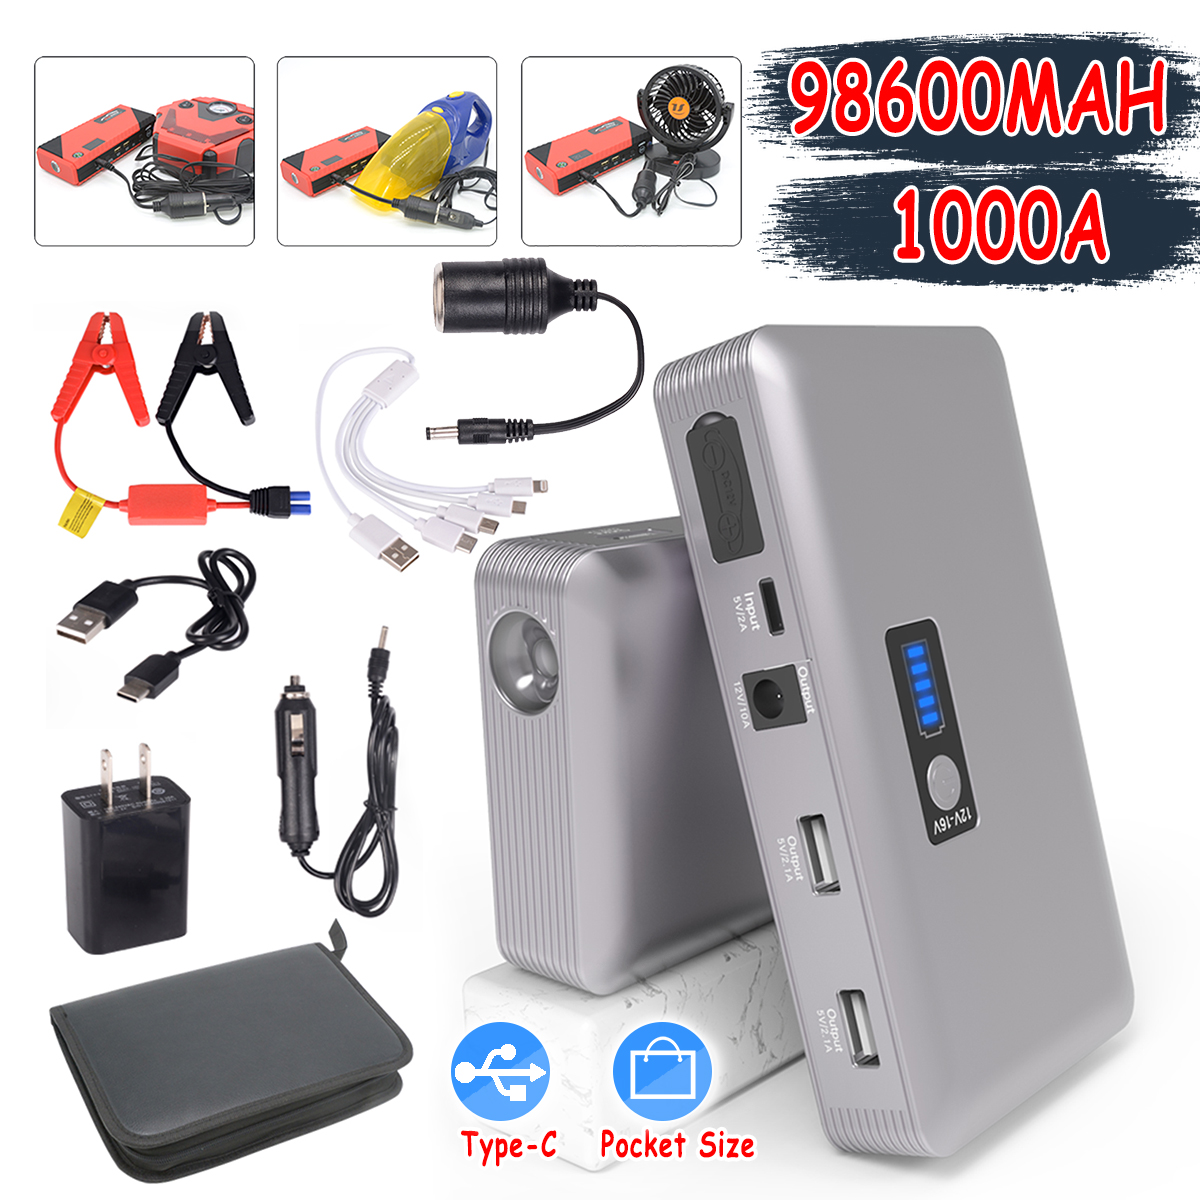 JX36 Display 98600mAh 12V Car Jump Starter Portable USB Emergency Power Bank Battery Booster Clamp 1000A DC Port Silver